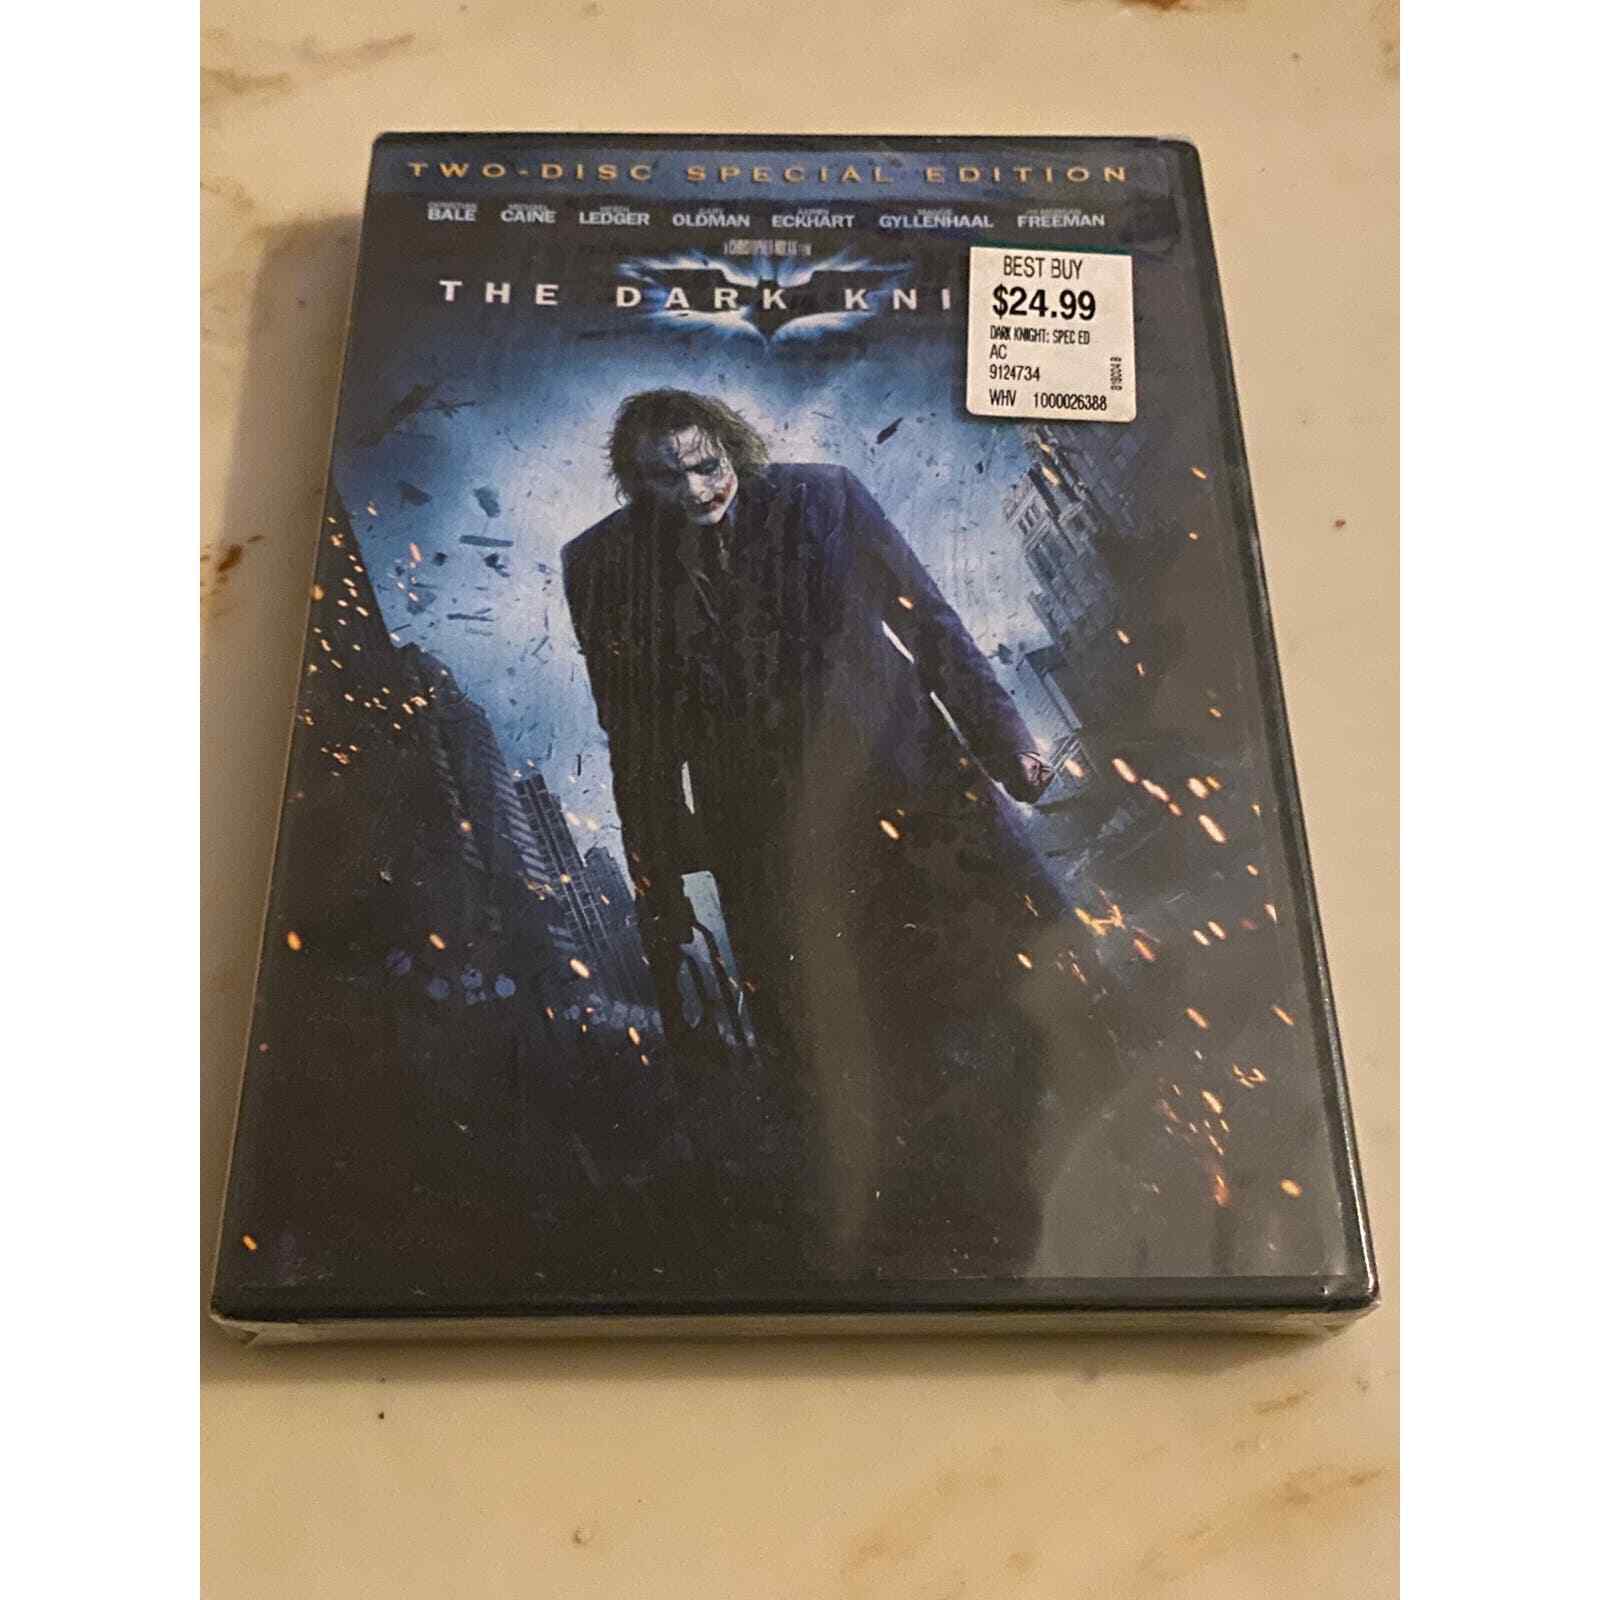 The Dark Knight (DVD, 2008) 2-Disc Special Edition - NEW SEALED